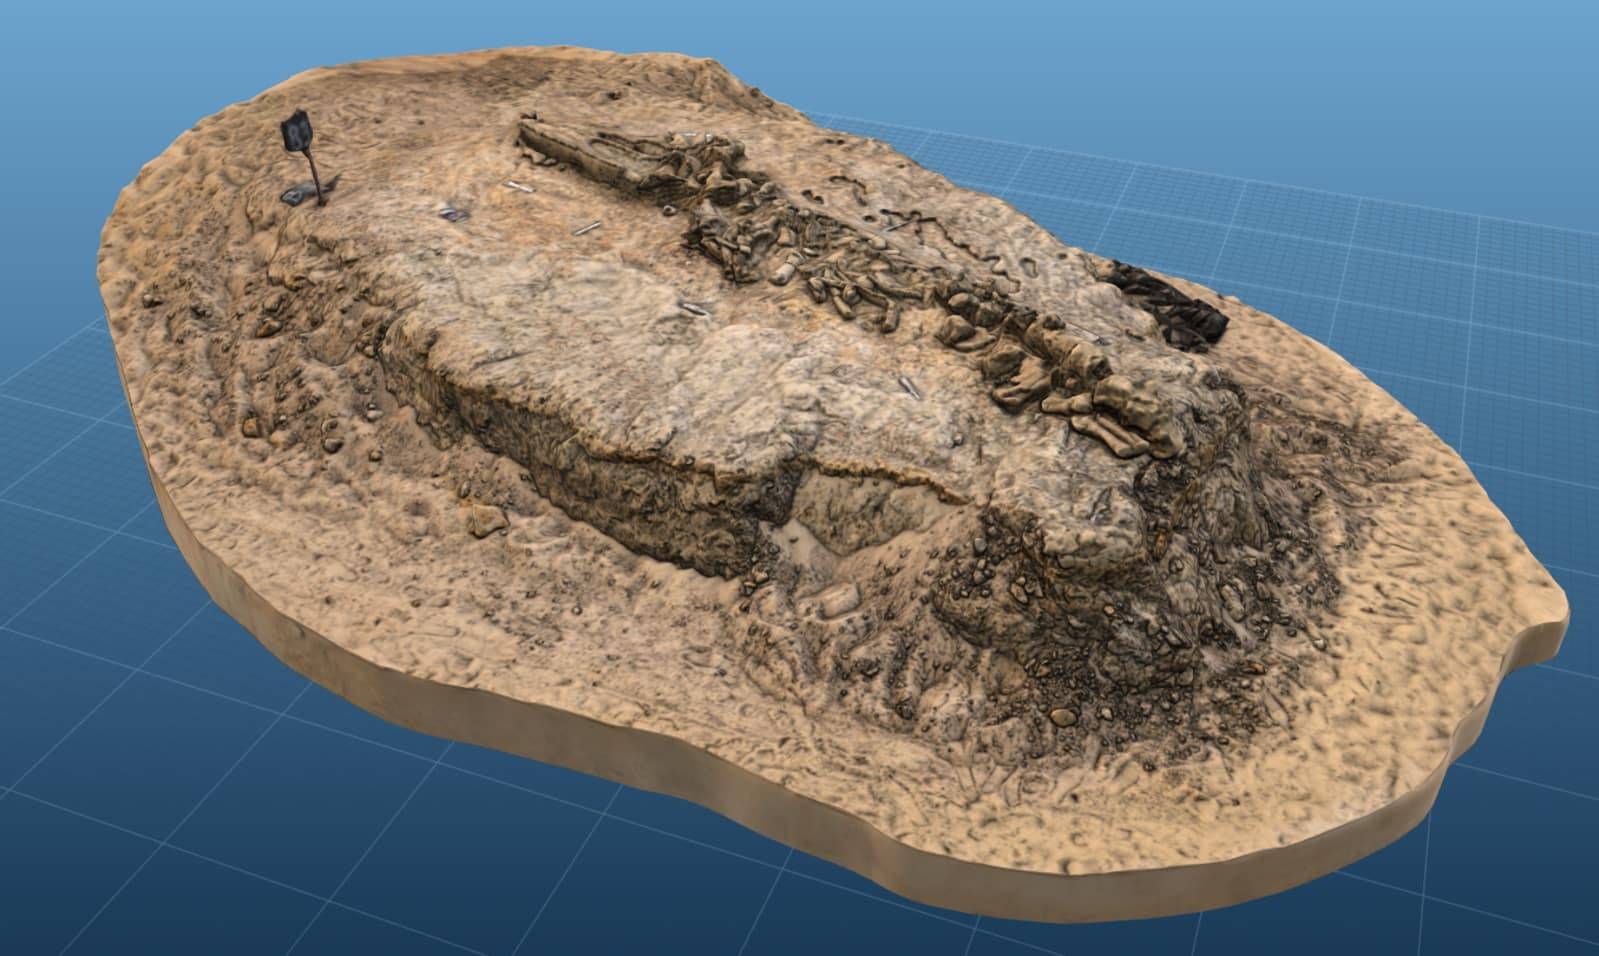 3D model of fossil whale MPC 675 from Cerro Ballena. (Image courtesy of Smithsonian.).